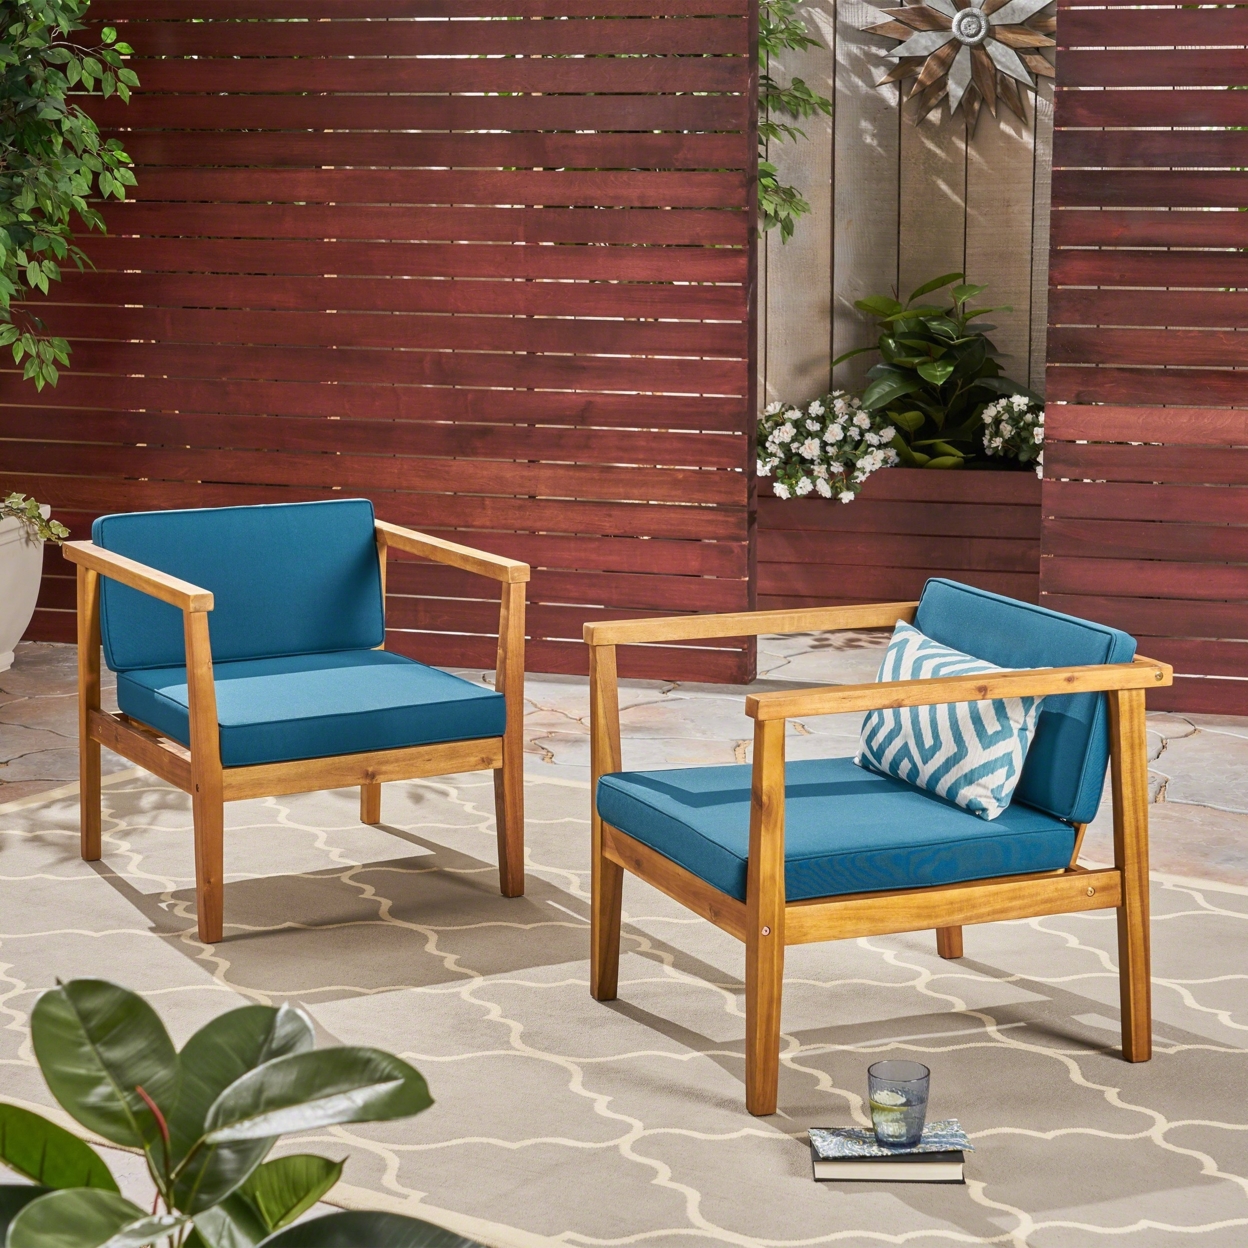 Thomson Outdoor Acacia Wood Club Chairs With Water-Resistant Cushions (Set Of 2) - Teak / Dark Teal